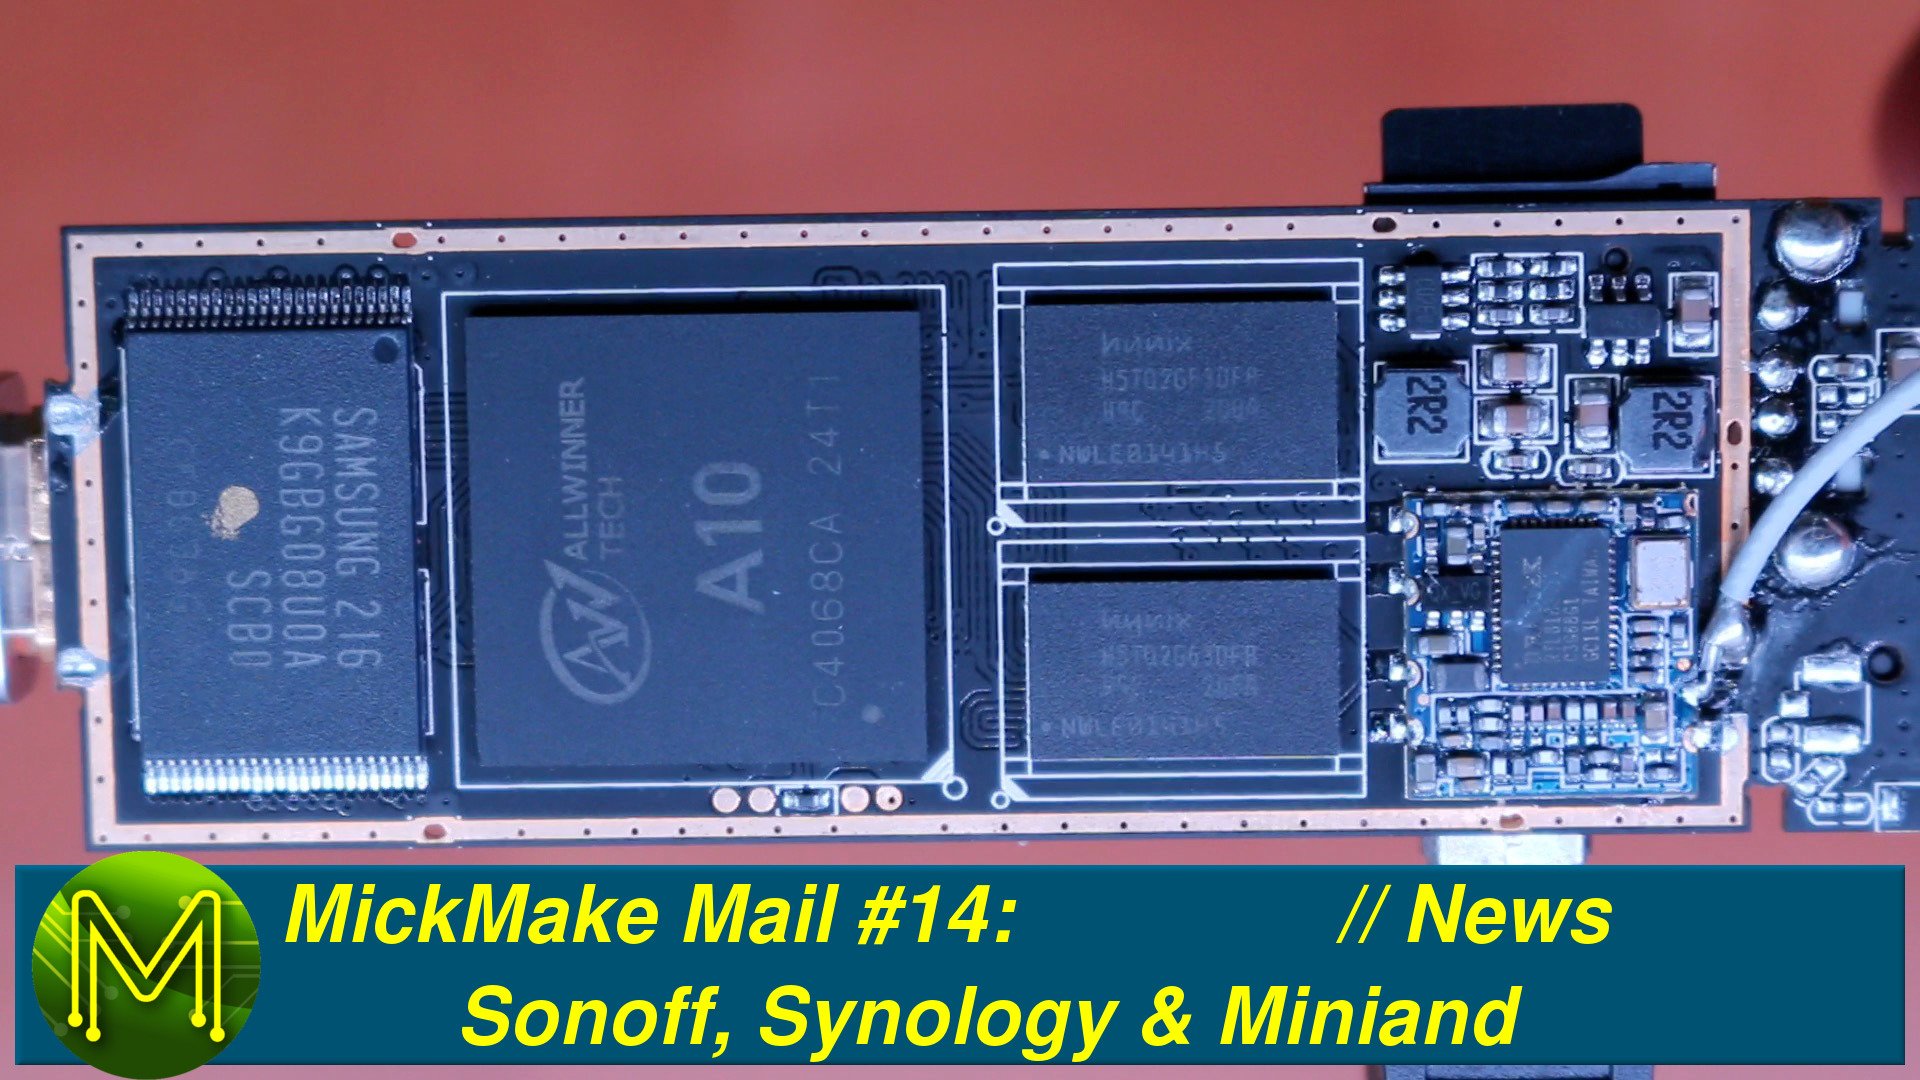 MickMake Mail #14: Sonoff, Synology & Miniand // News